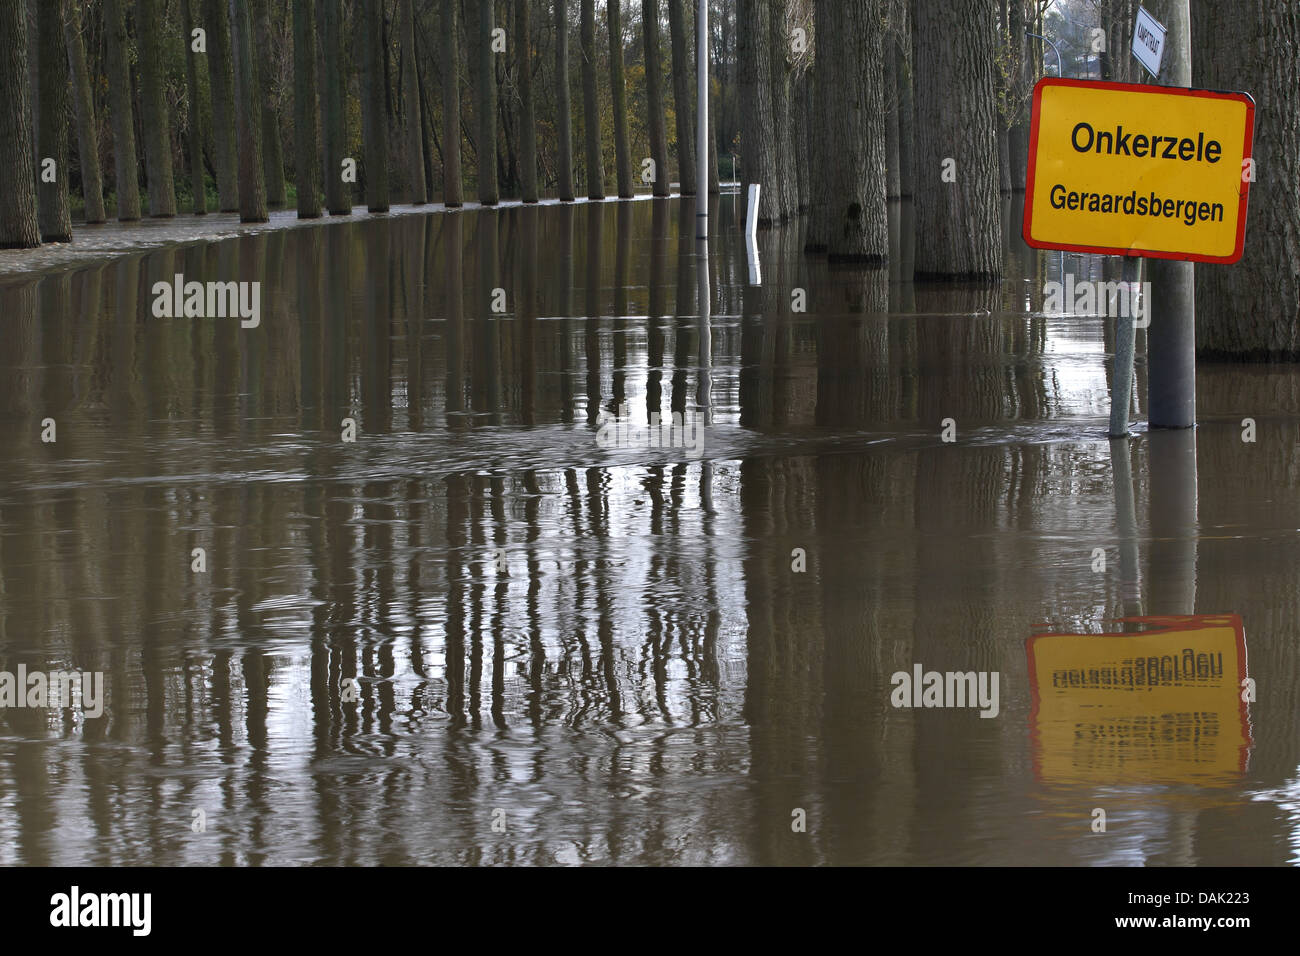 flooded avenue and place name sign, Belgium, Oost-Vlaanderen, Onkerzele Stock Photo